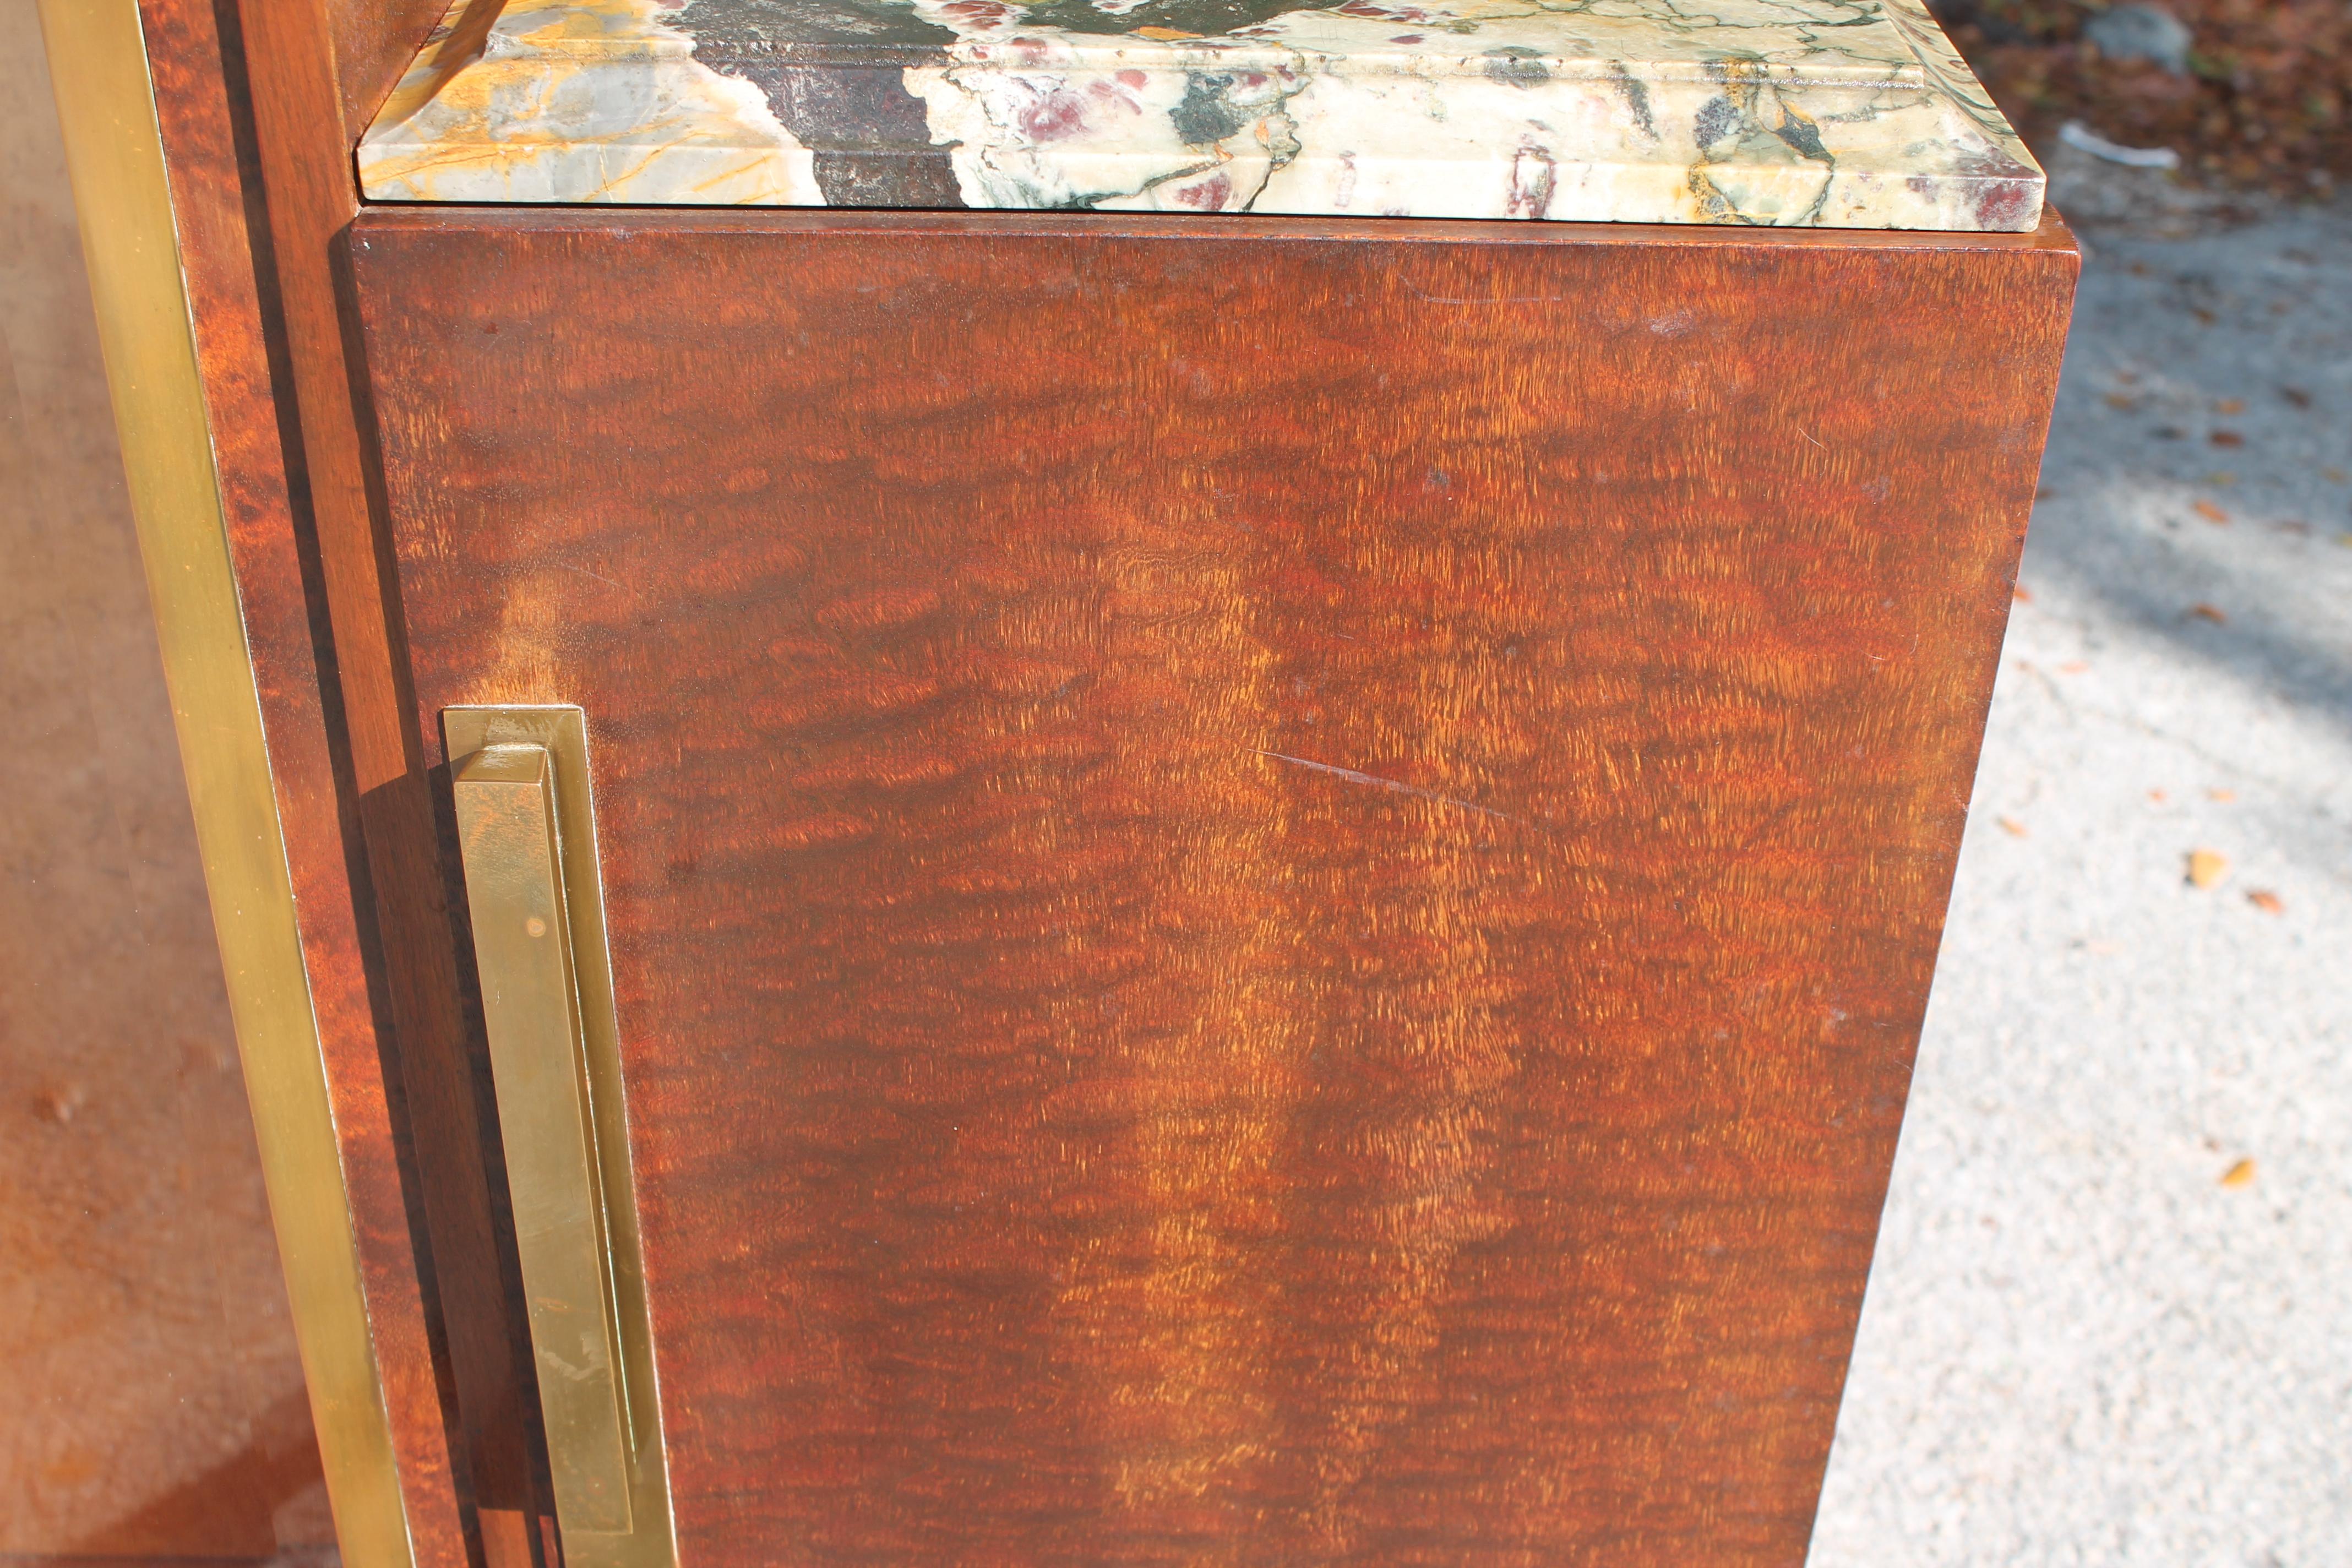 1940's French Art Deco Rosewood Display / Vitrine / Dry Bar Cabinet - Marble Top In Good Condition For Sale In Opa Locka, FL